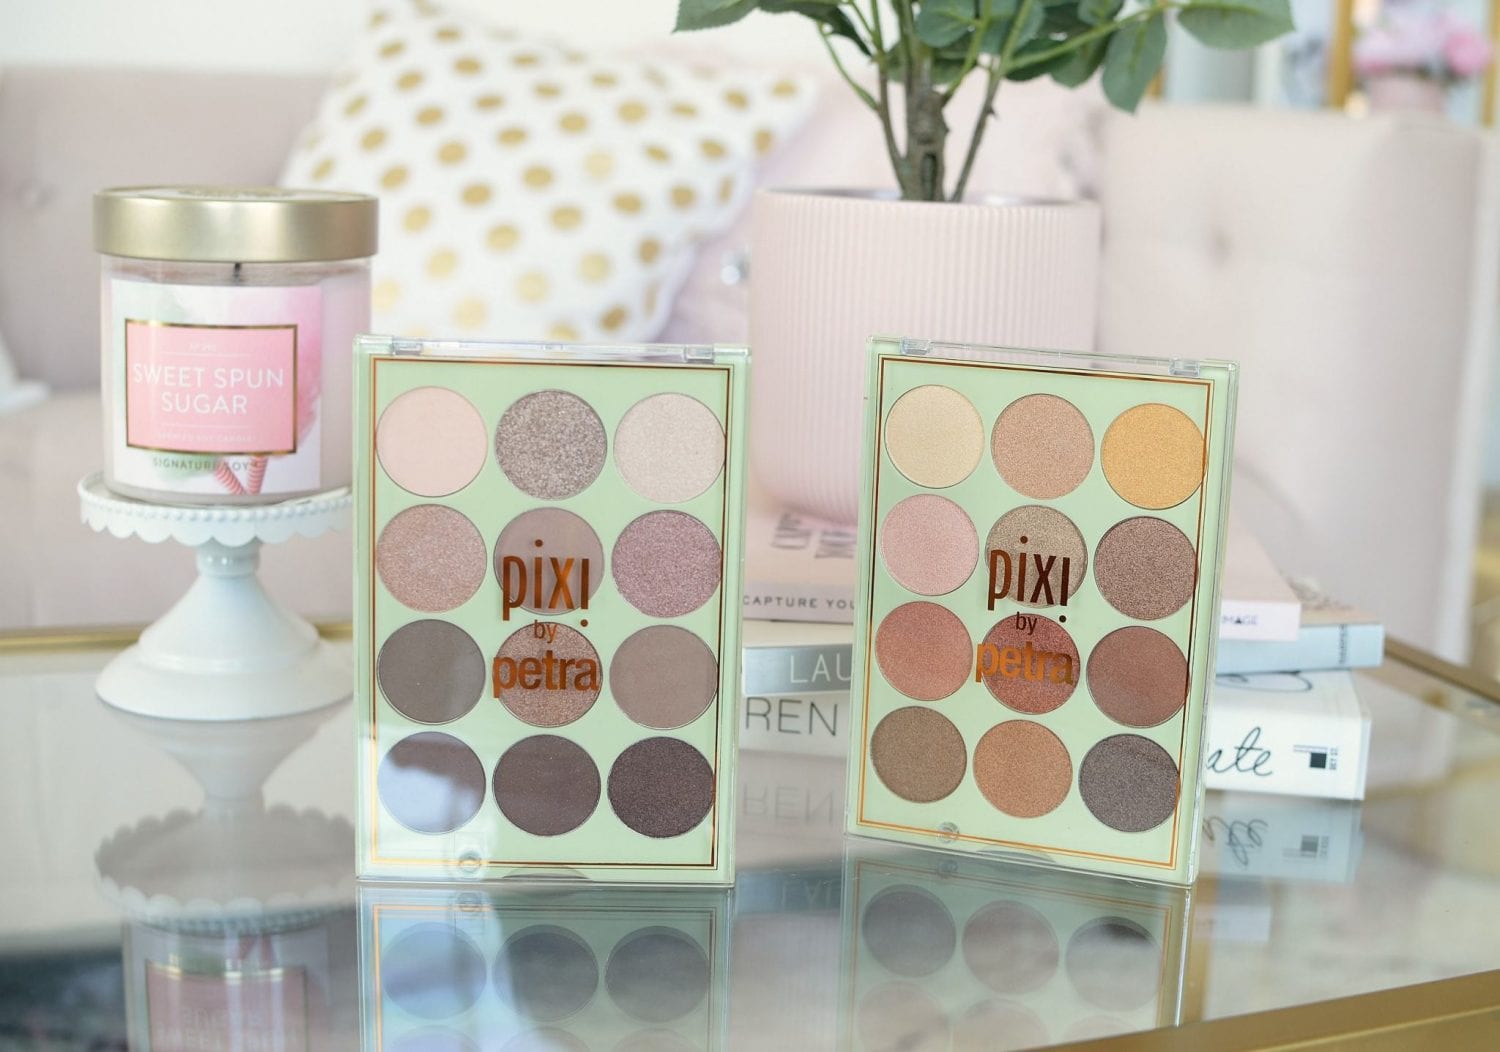 Pixi by Petra Eye Reflection Shadow Palette in Natural Beauty 